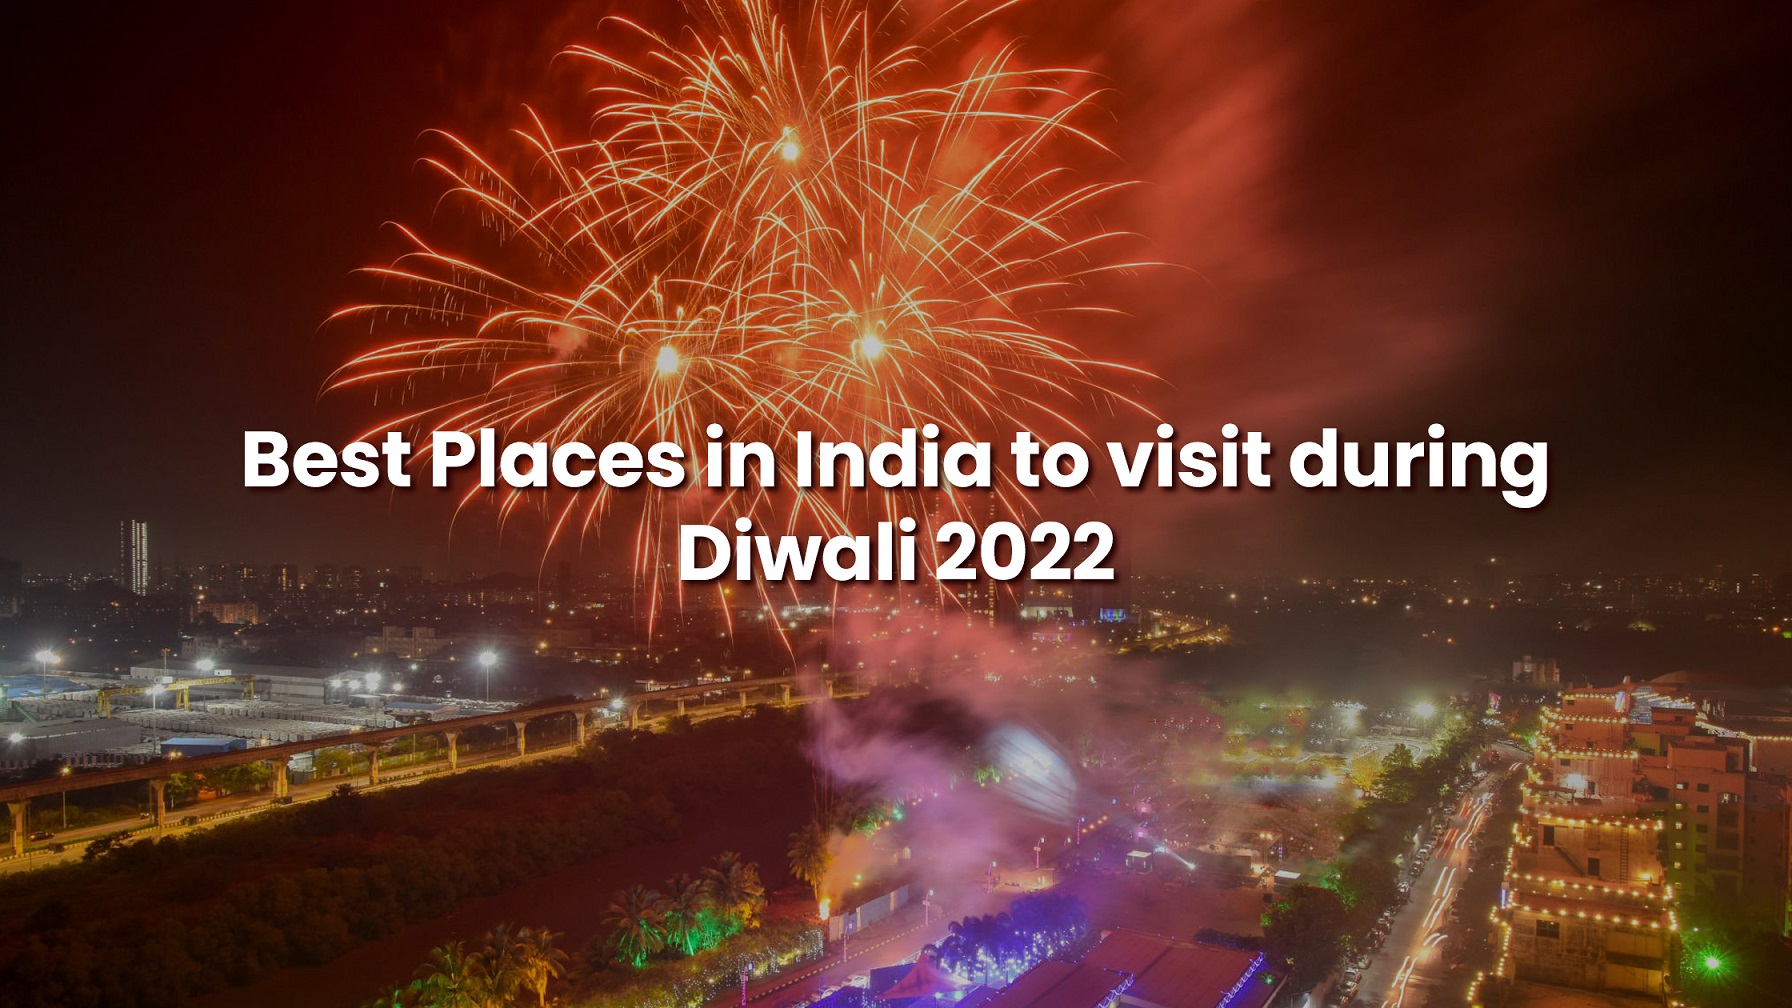 Best Places in India to visit during Diwali 2022- Immersion Journeys